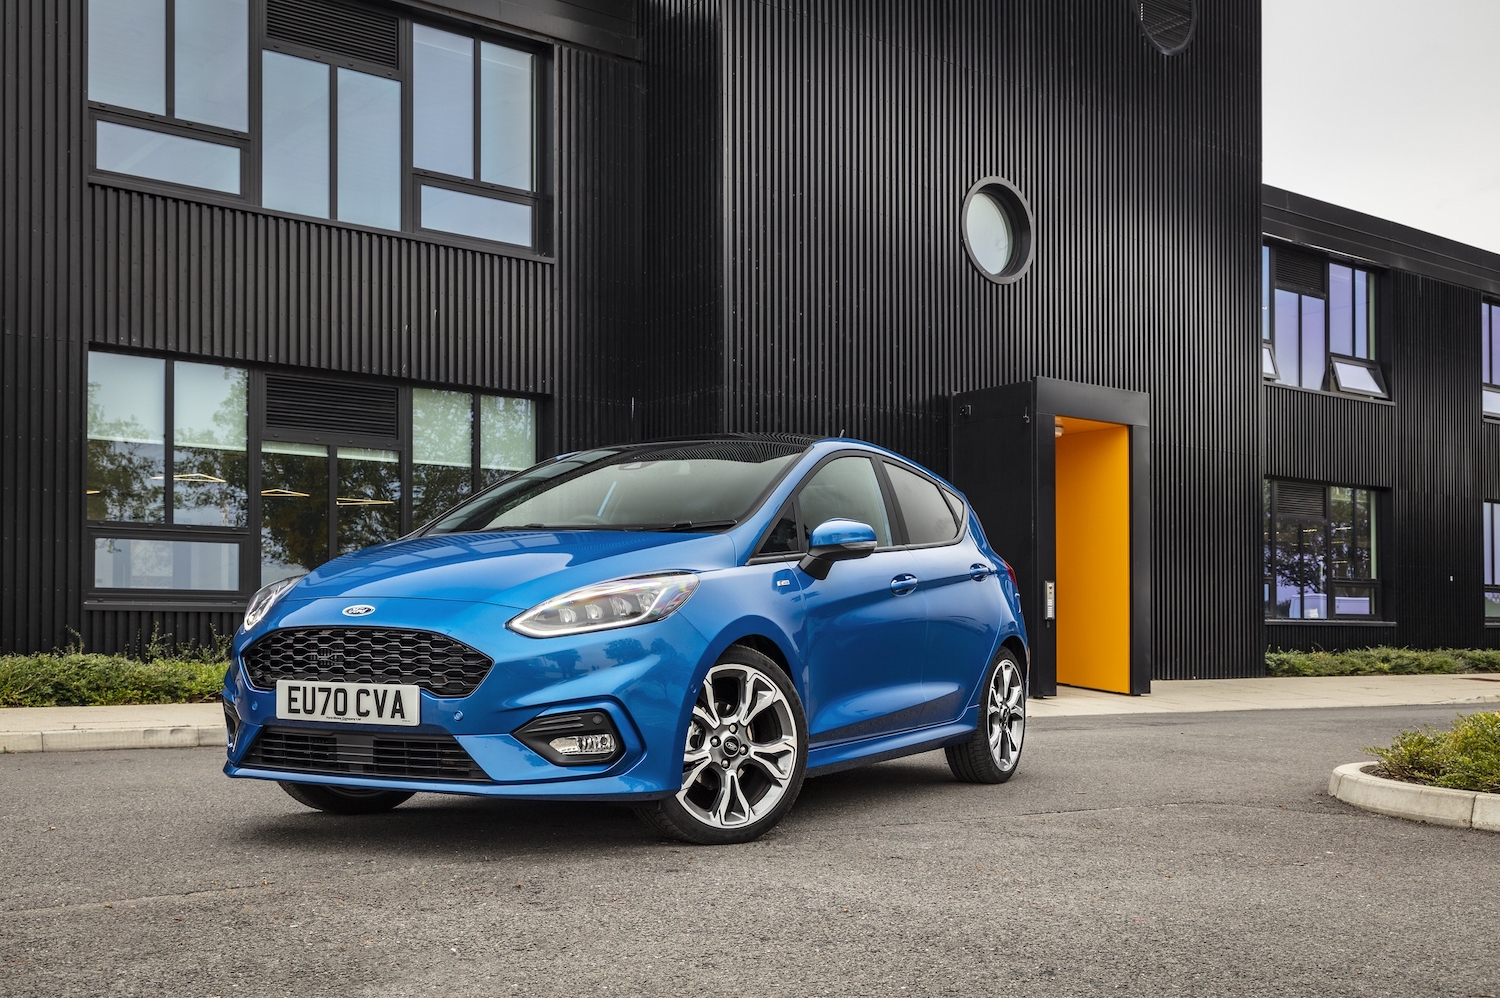 Ford Fiesta named UK's best-selling used car of 2022 in the same year Ford  announced plans to axe model – Car Dealer Magazine